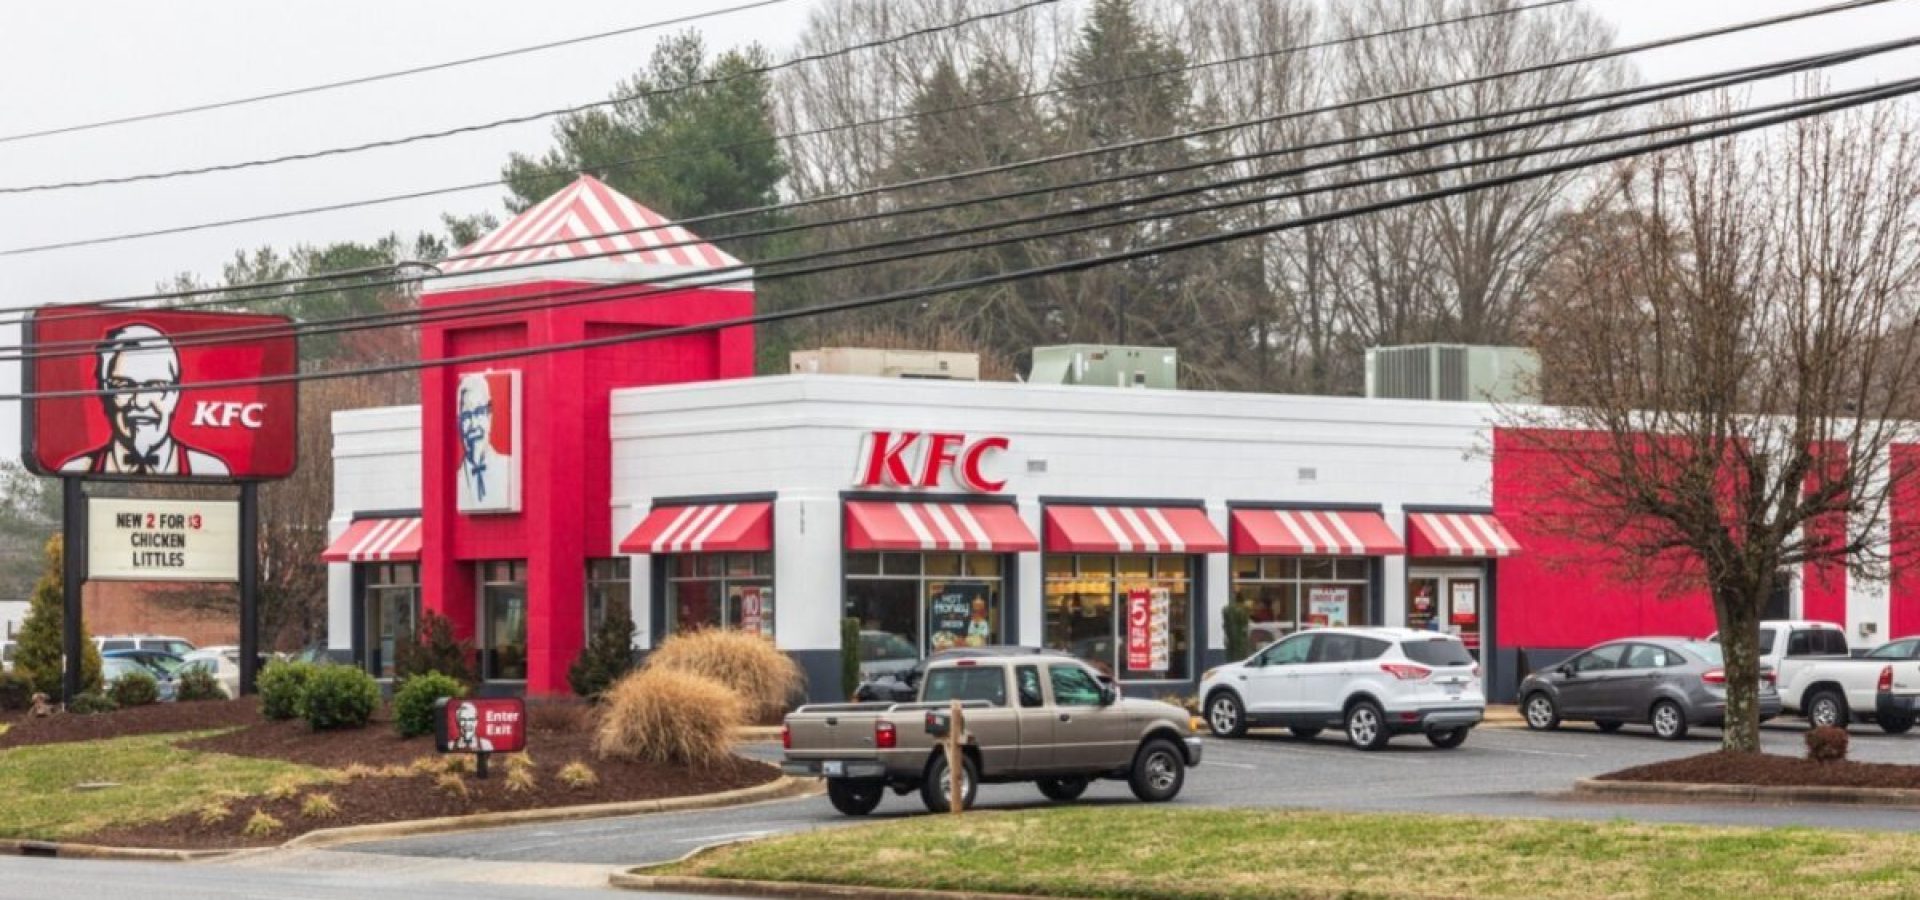 KFC and its plans